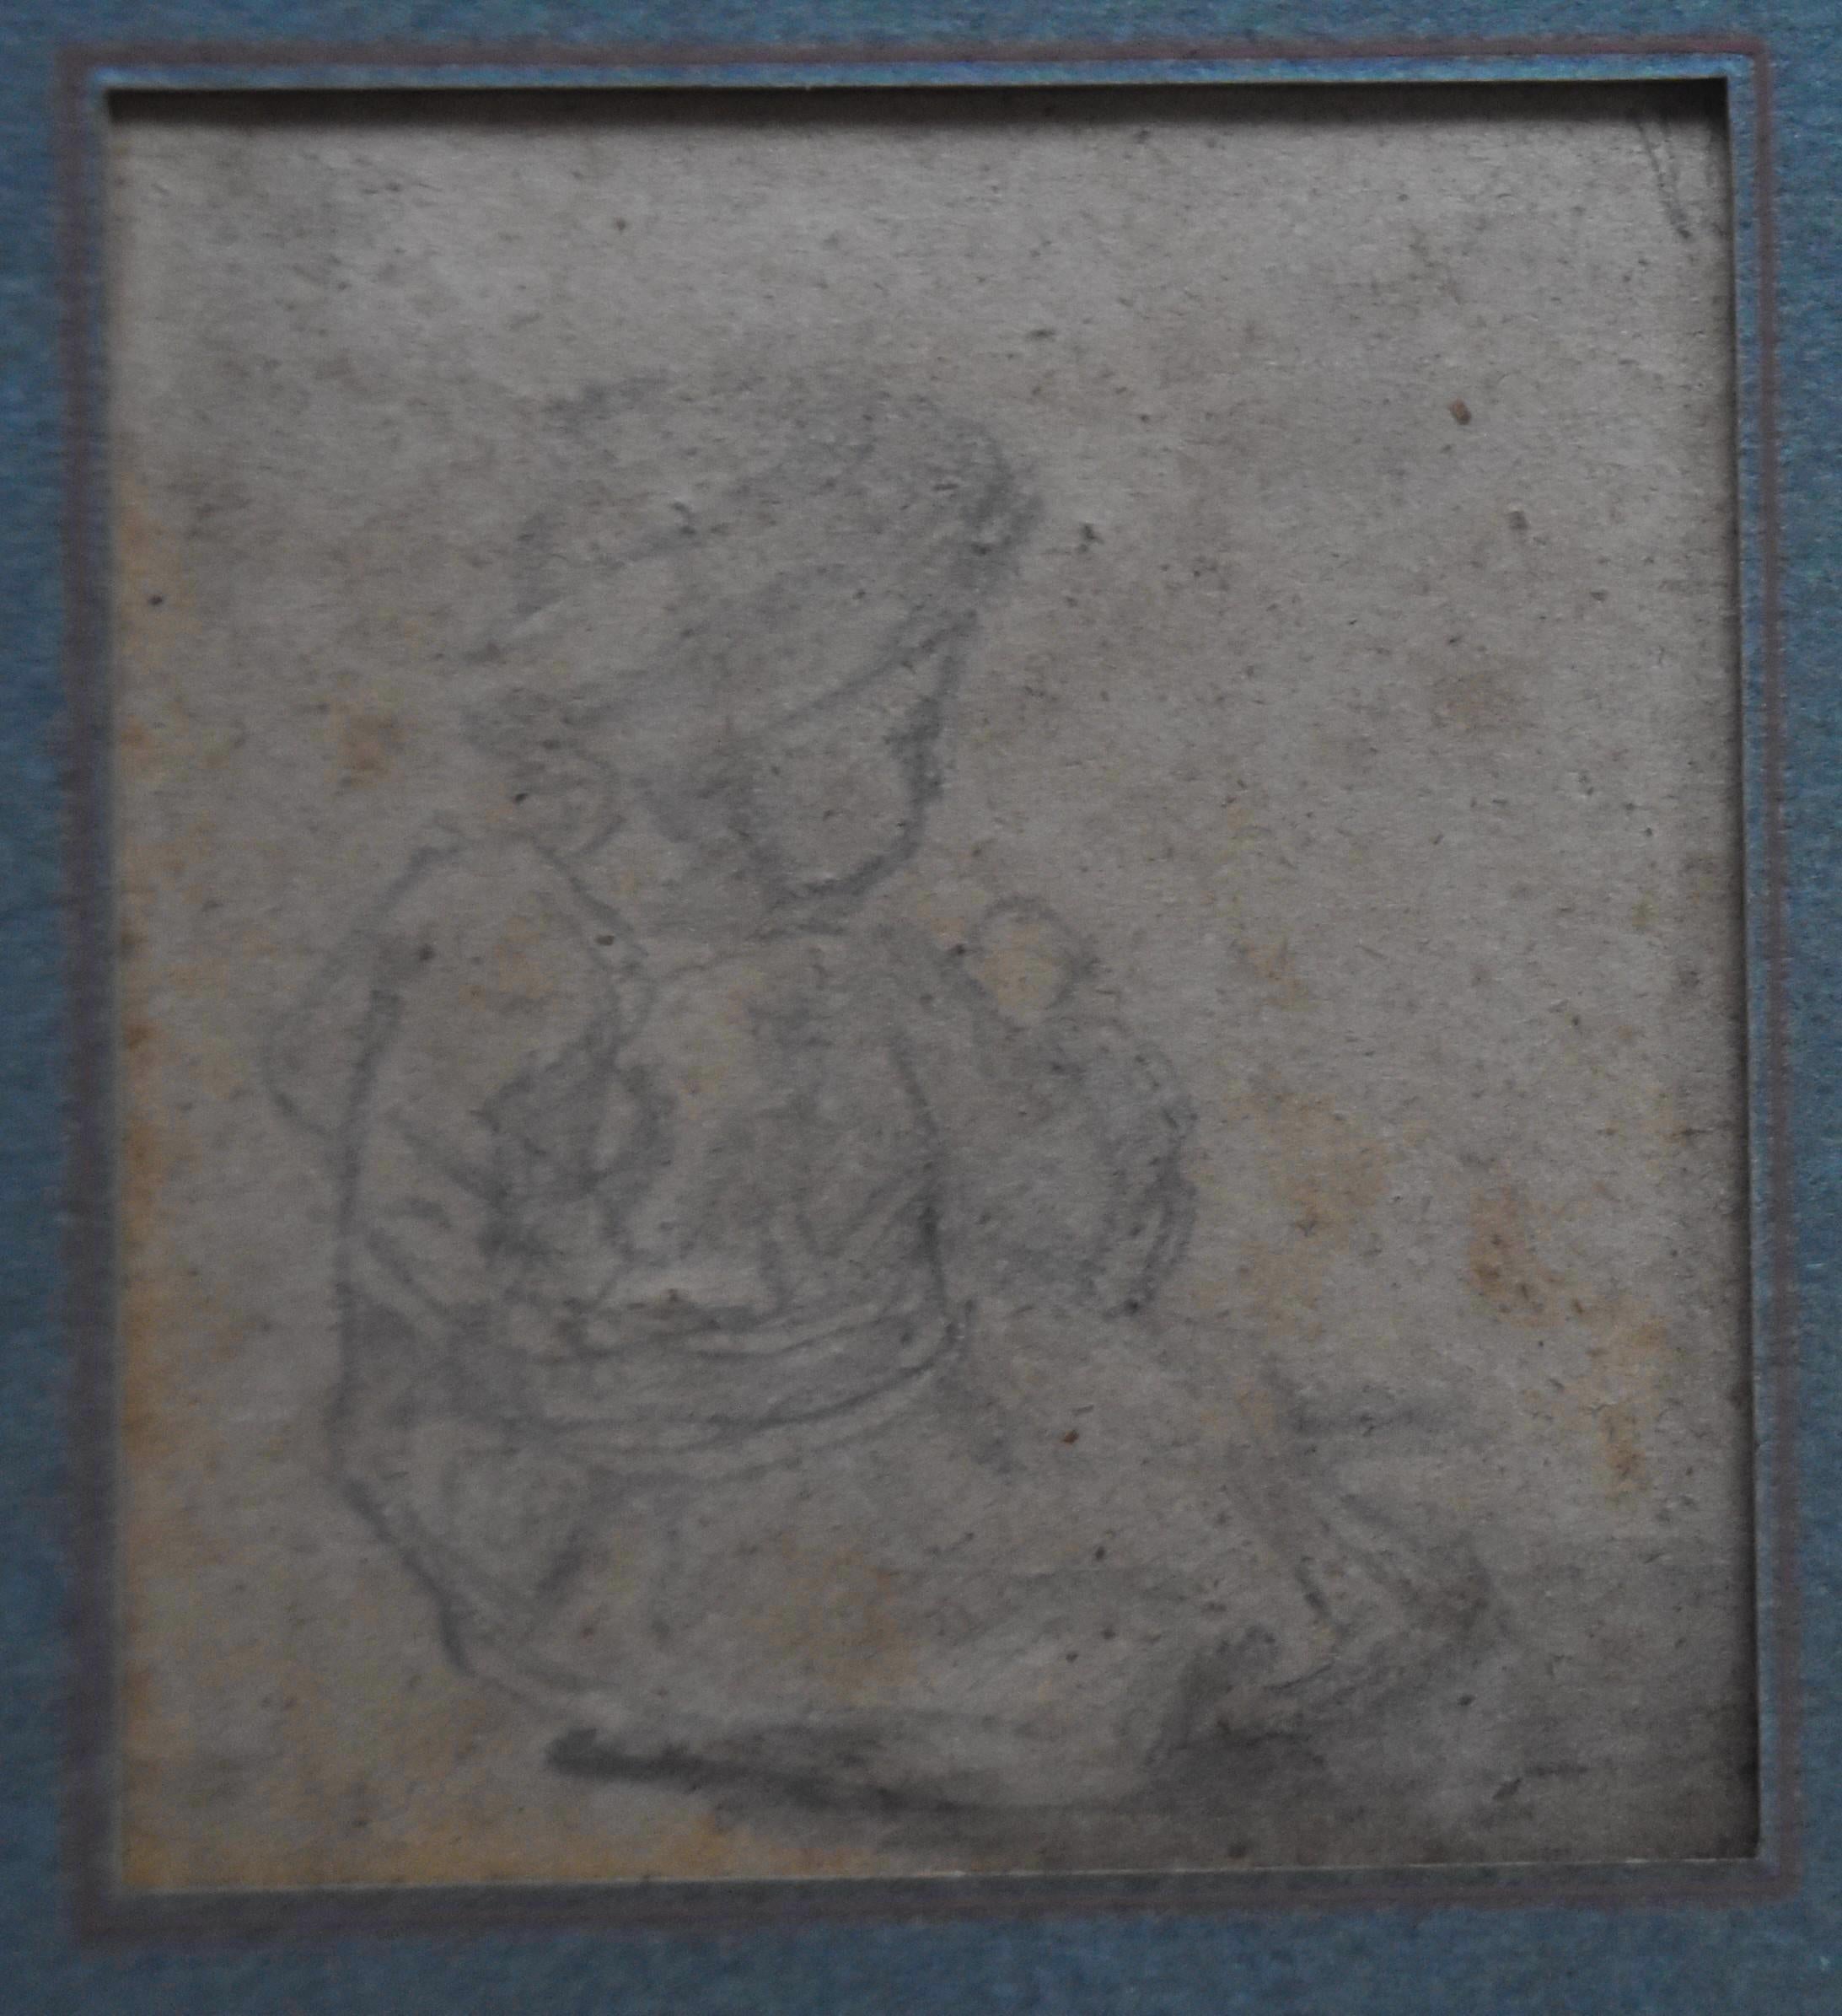 Charles Emile JACQUE (Paris 1813 - 1894)
Four drawings in the same vintage mount with the name of the artist

- A baby (?)
Pencil on paper
8.5 x 8 cm
condition : Distressed yellowed and stained (see photographs please)

-Three sheeps
Pen and black